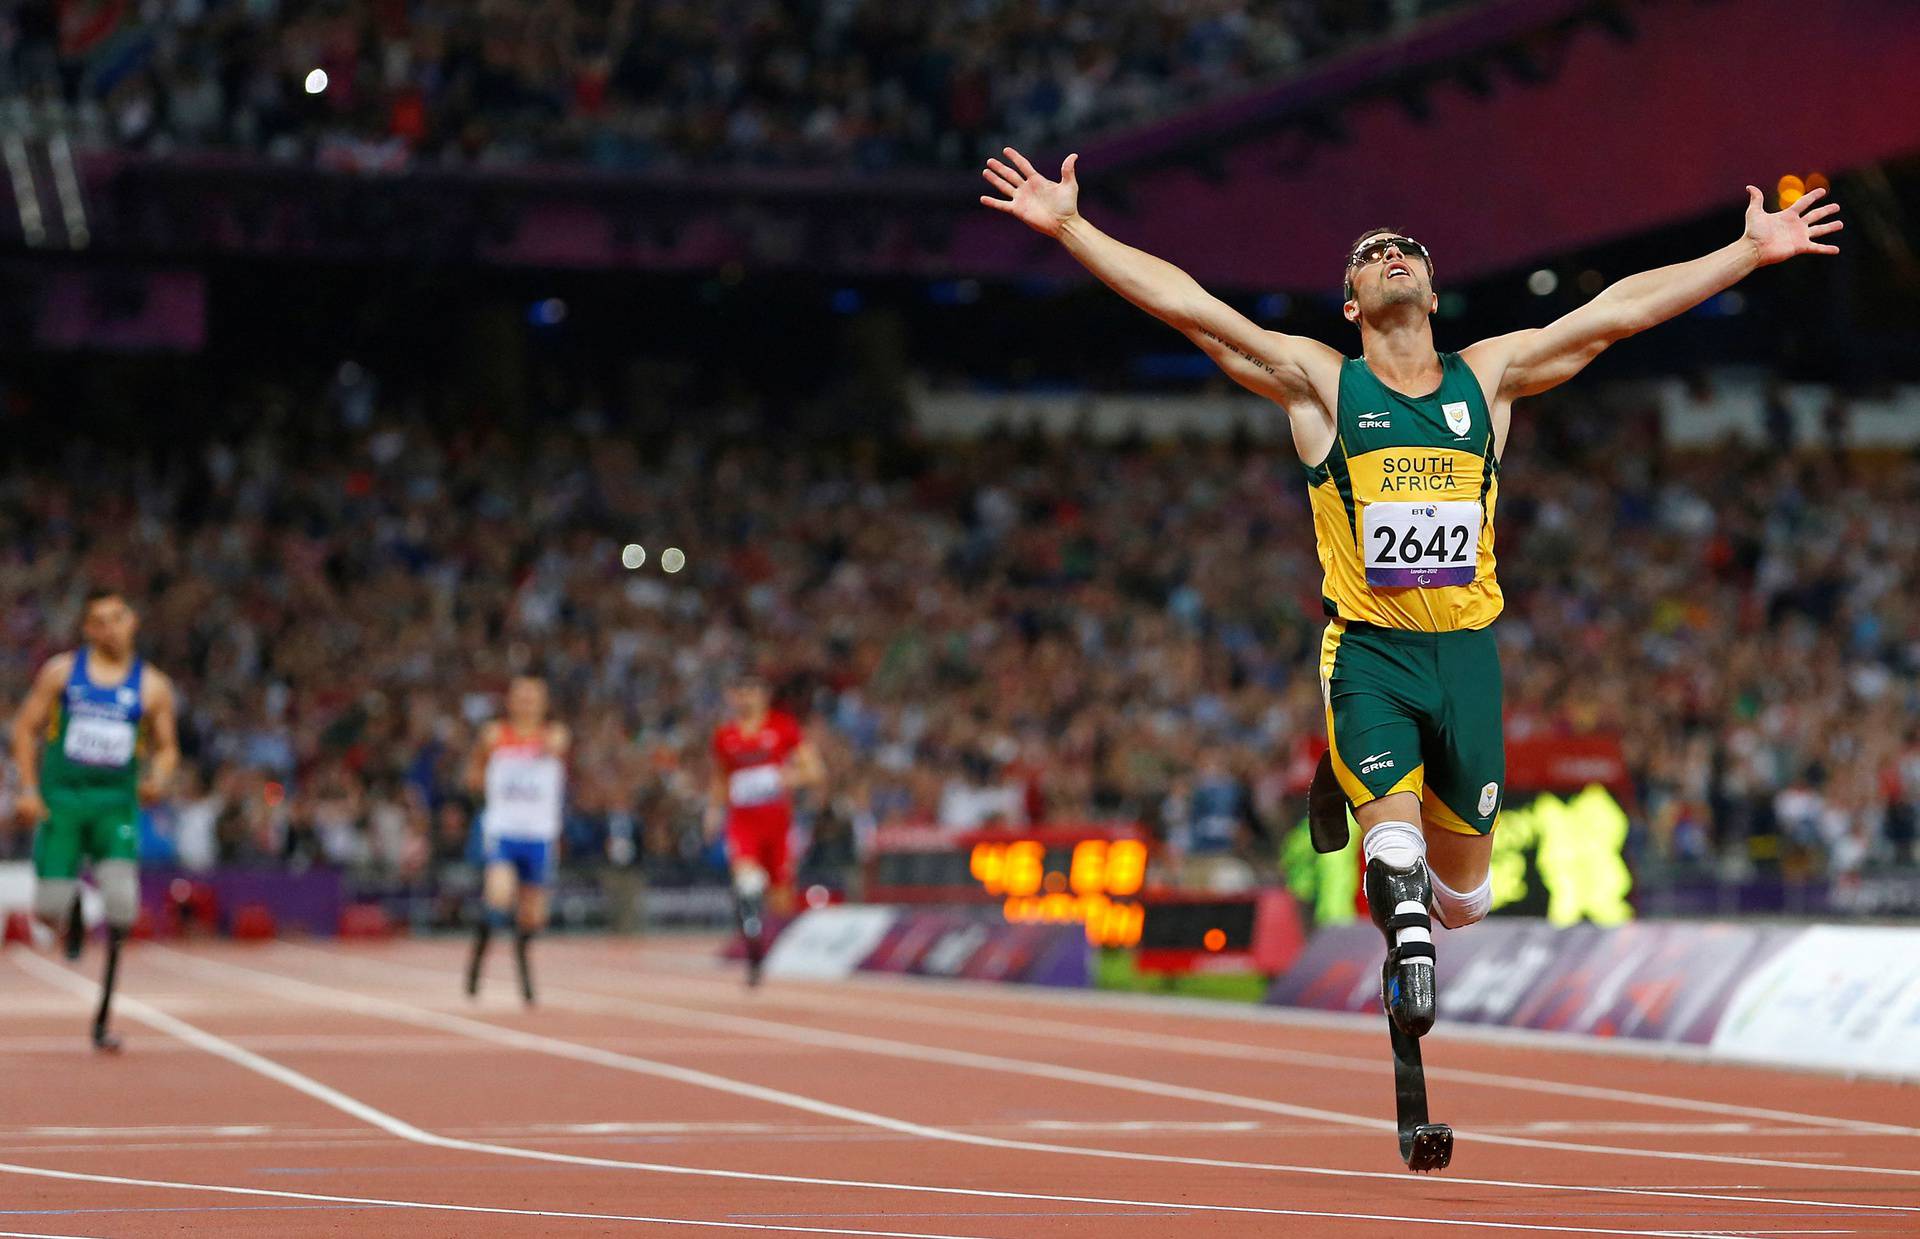 FILE PHOTO: Oscar Pistorius of South Africa celebrates winning the Men's 400m T44 Final during the London 2012 Paralympic Games